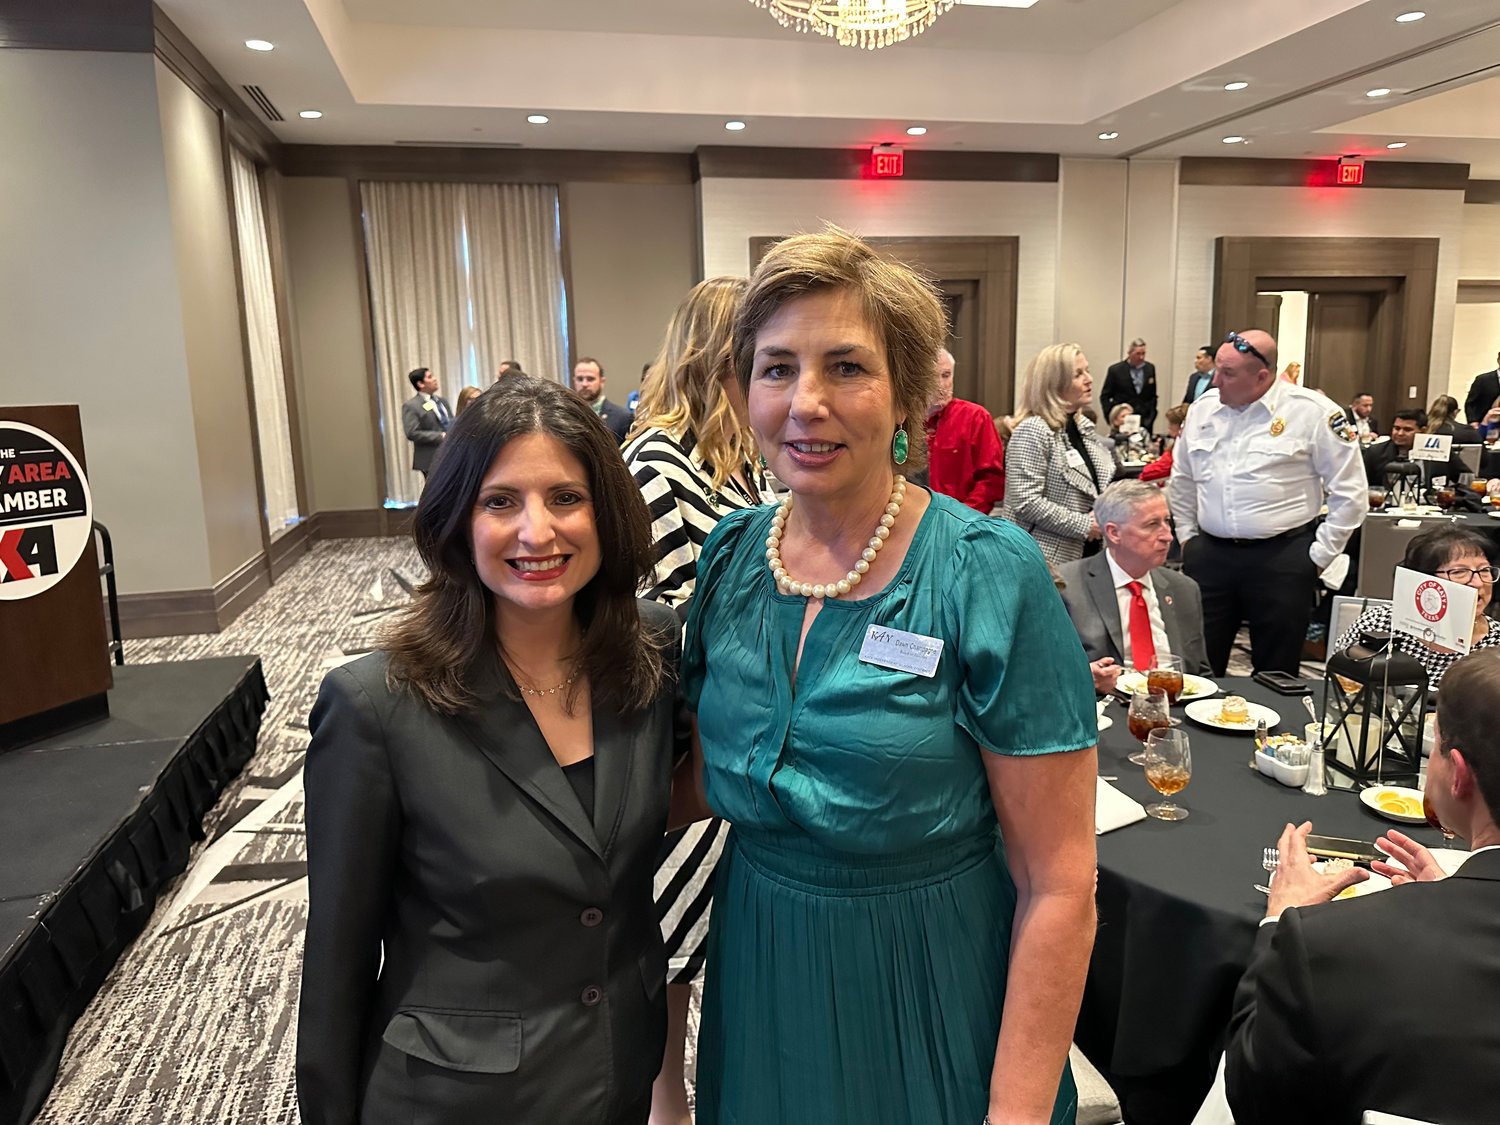 New Harris County Pct. 4 Commissioner Lesley Briones meets Katy ISD Position 7 Trustee Dawn Champagne at the Katy Area Chamber of Commerce State of the City luncheon.